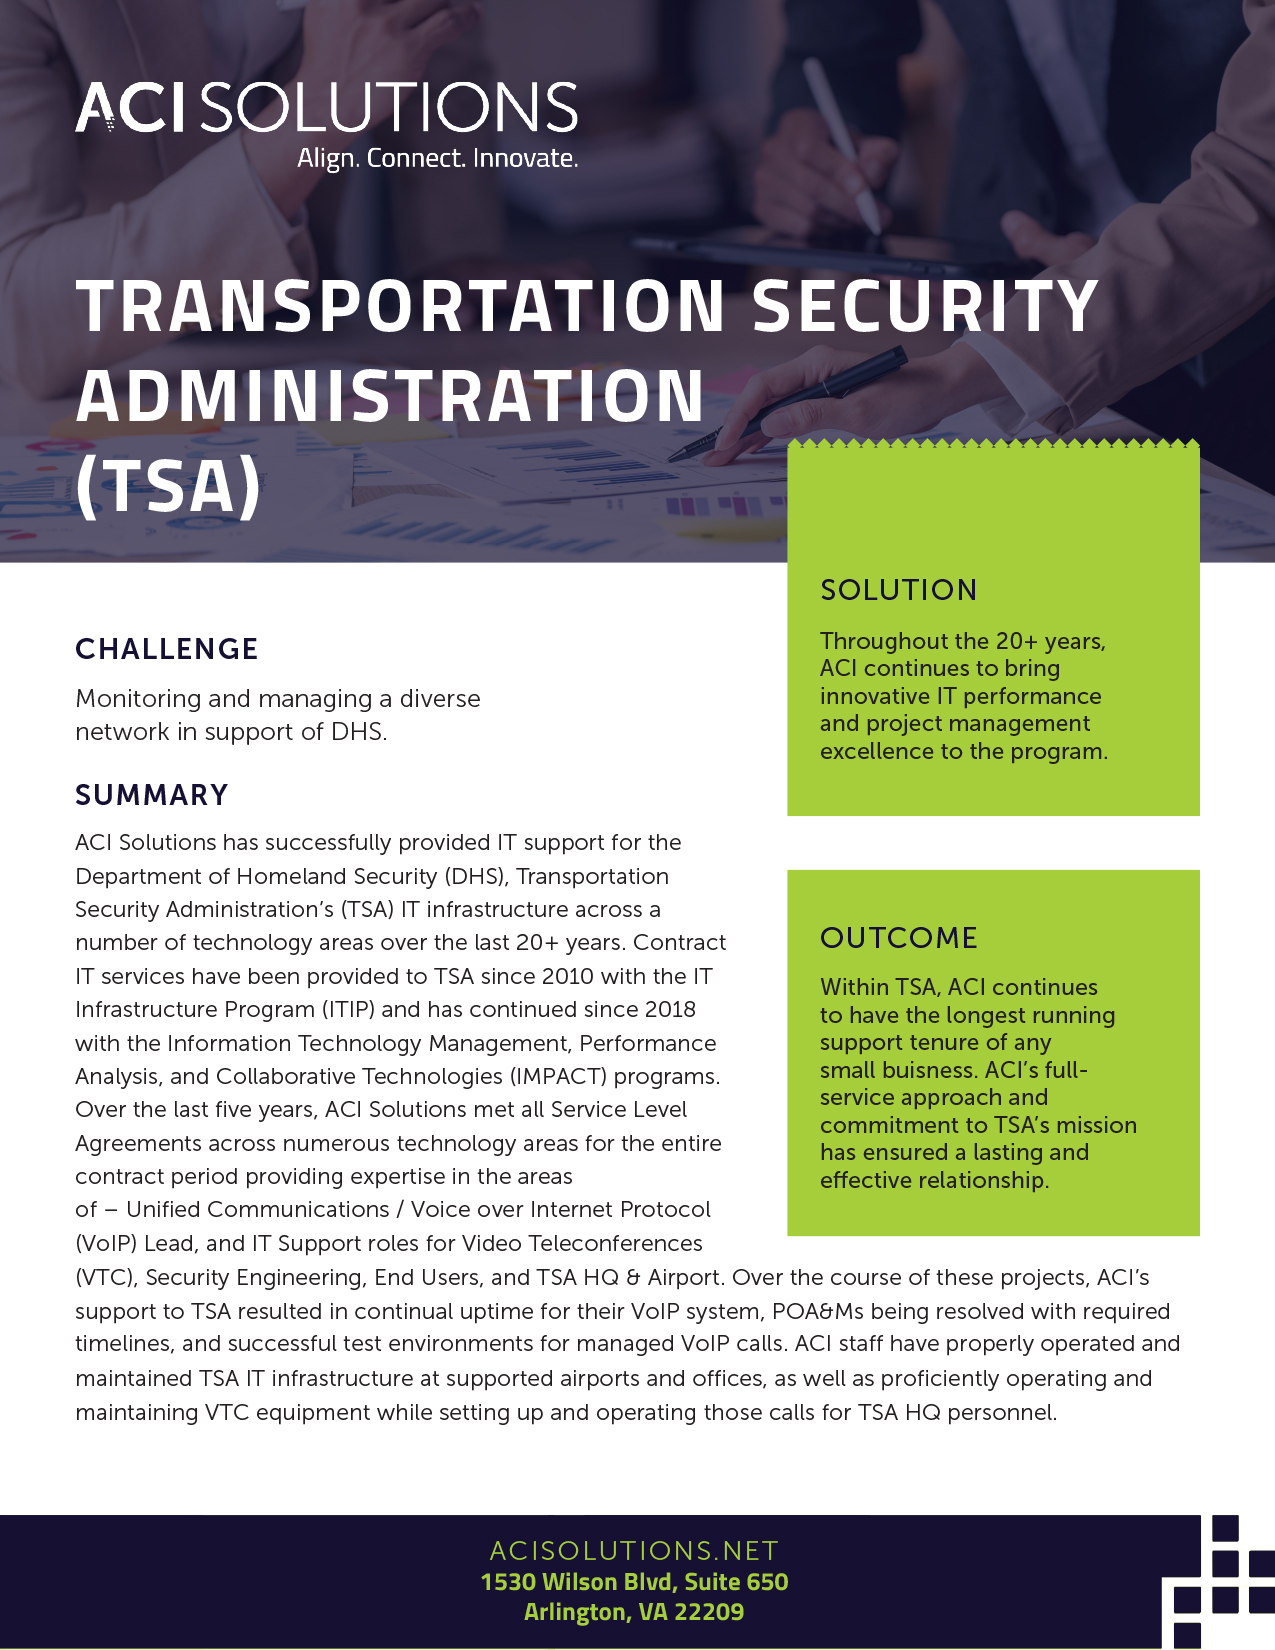 ACI Solutions has successfully provides IT support for the Department of Homeland Security (DHS), Transportation Security Administration’s (TSA) IT infrastructure across a number of technology areas over the last 20+ year. (Click to download PDF)